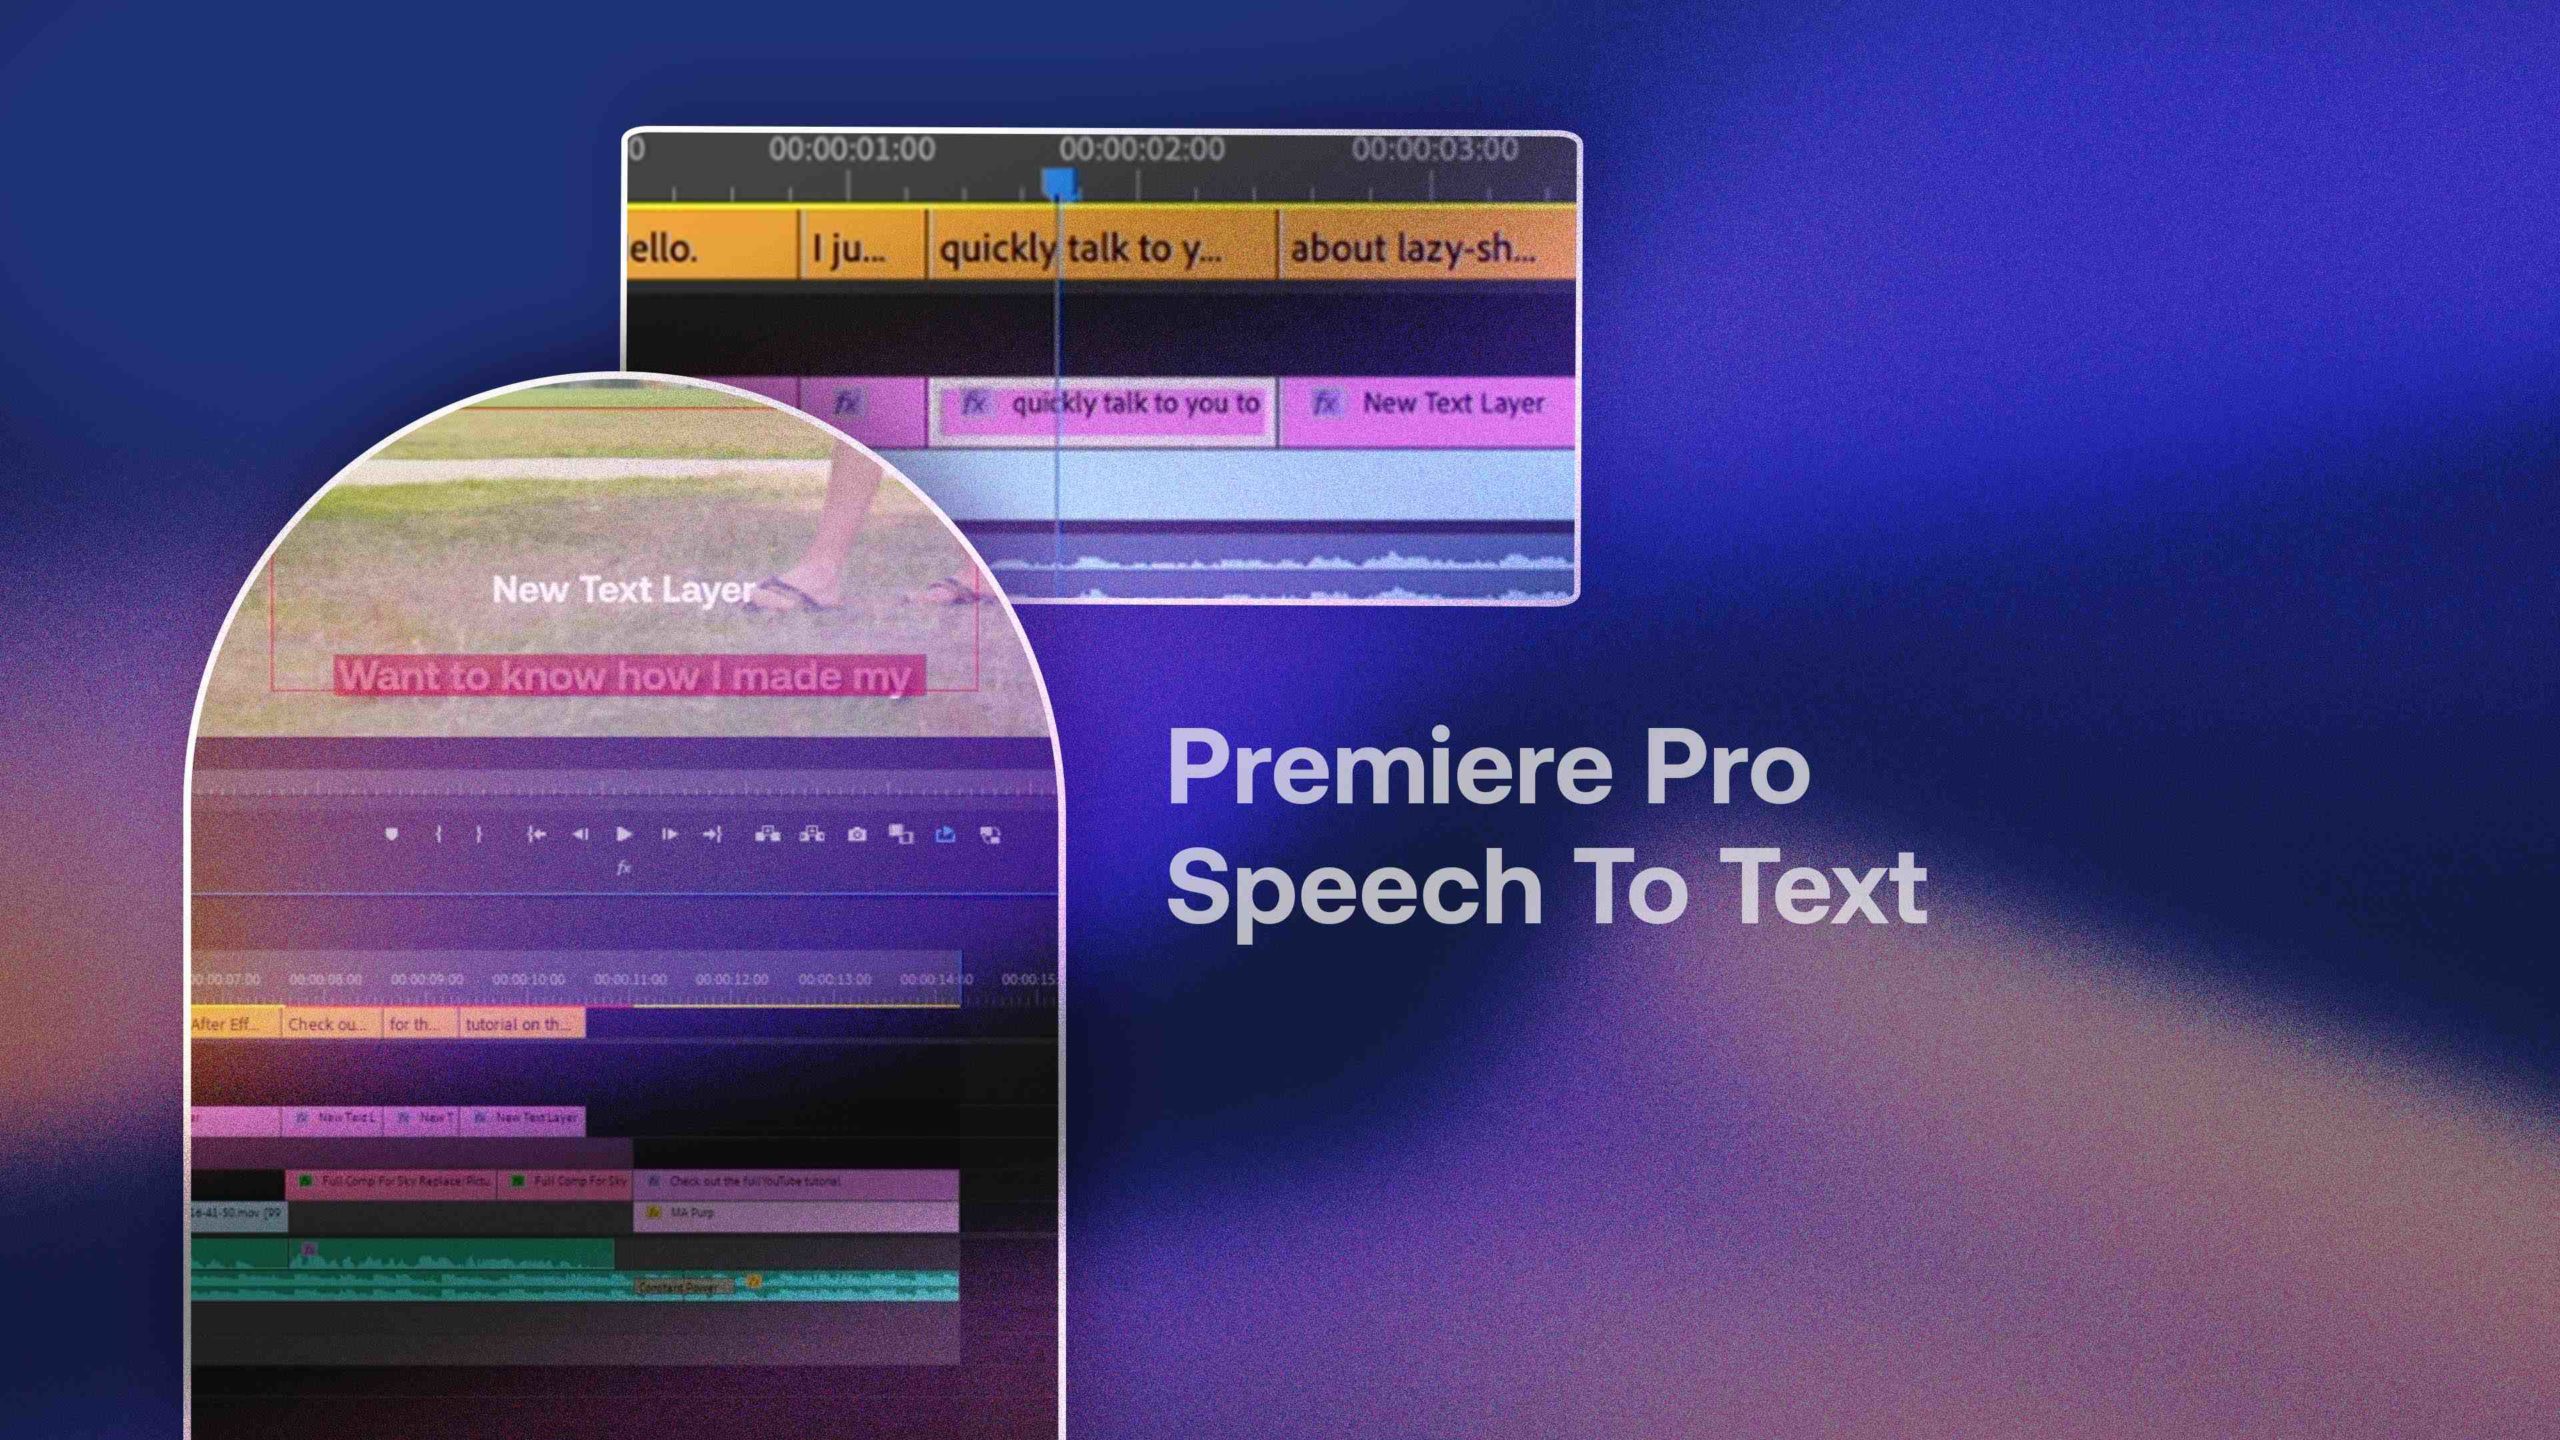 speech to text for premiere pro